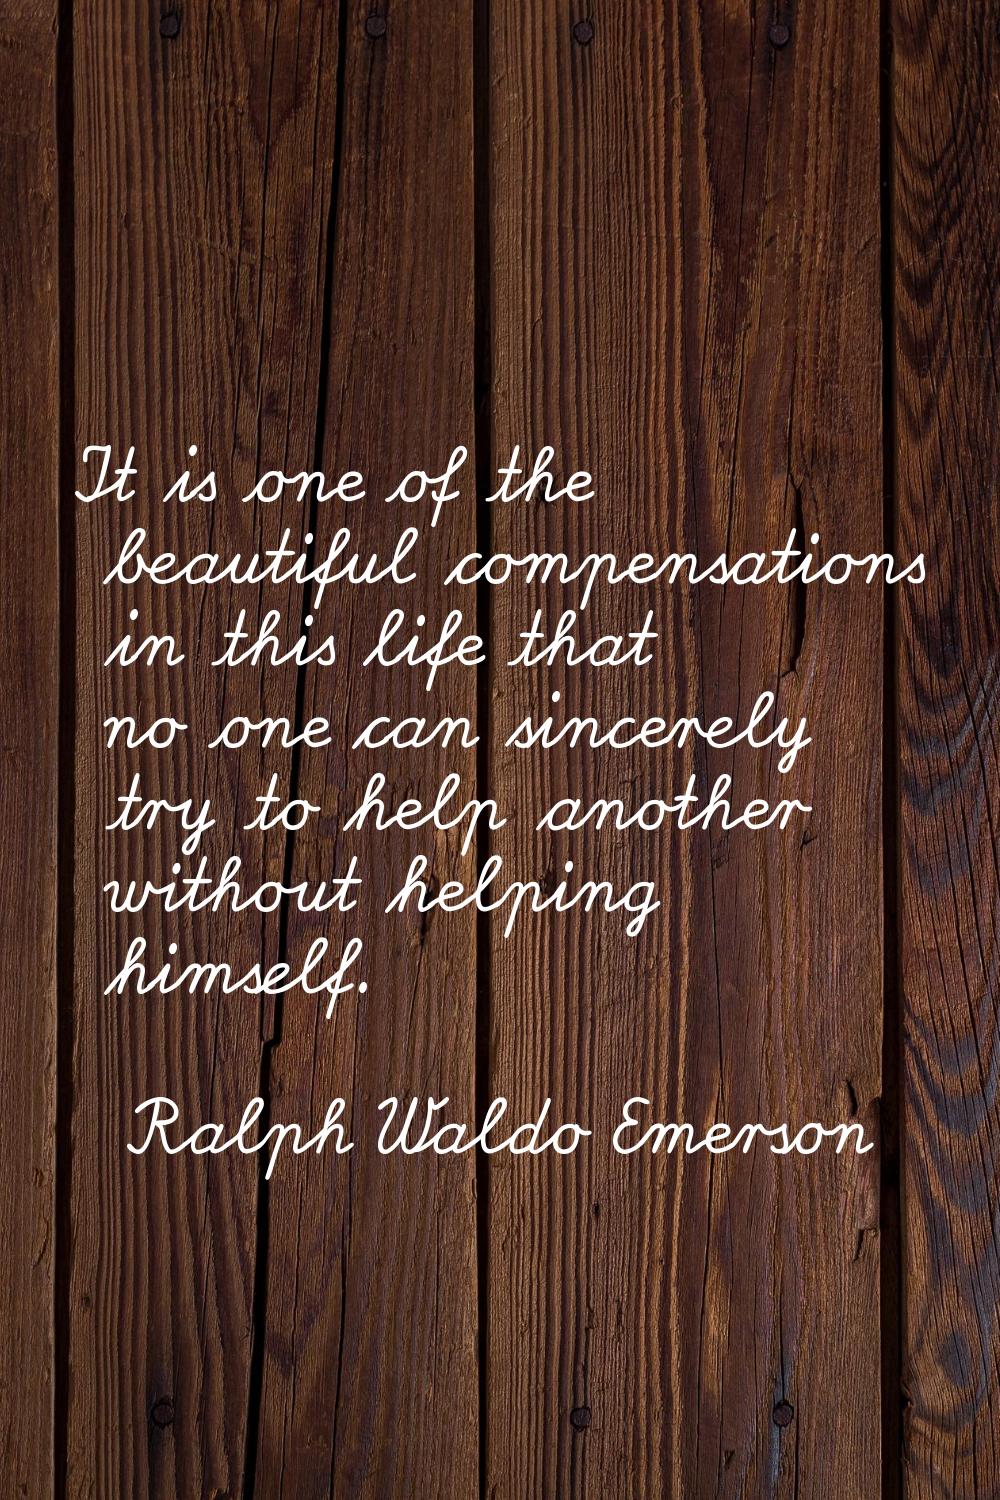 It is one of the beautiful compensations in this life that no one can sincerely try to help another